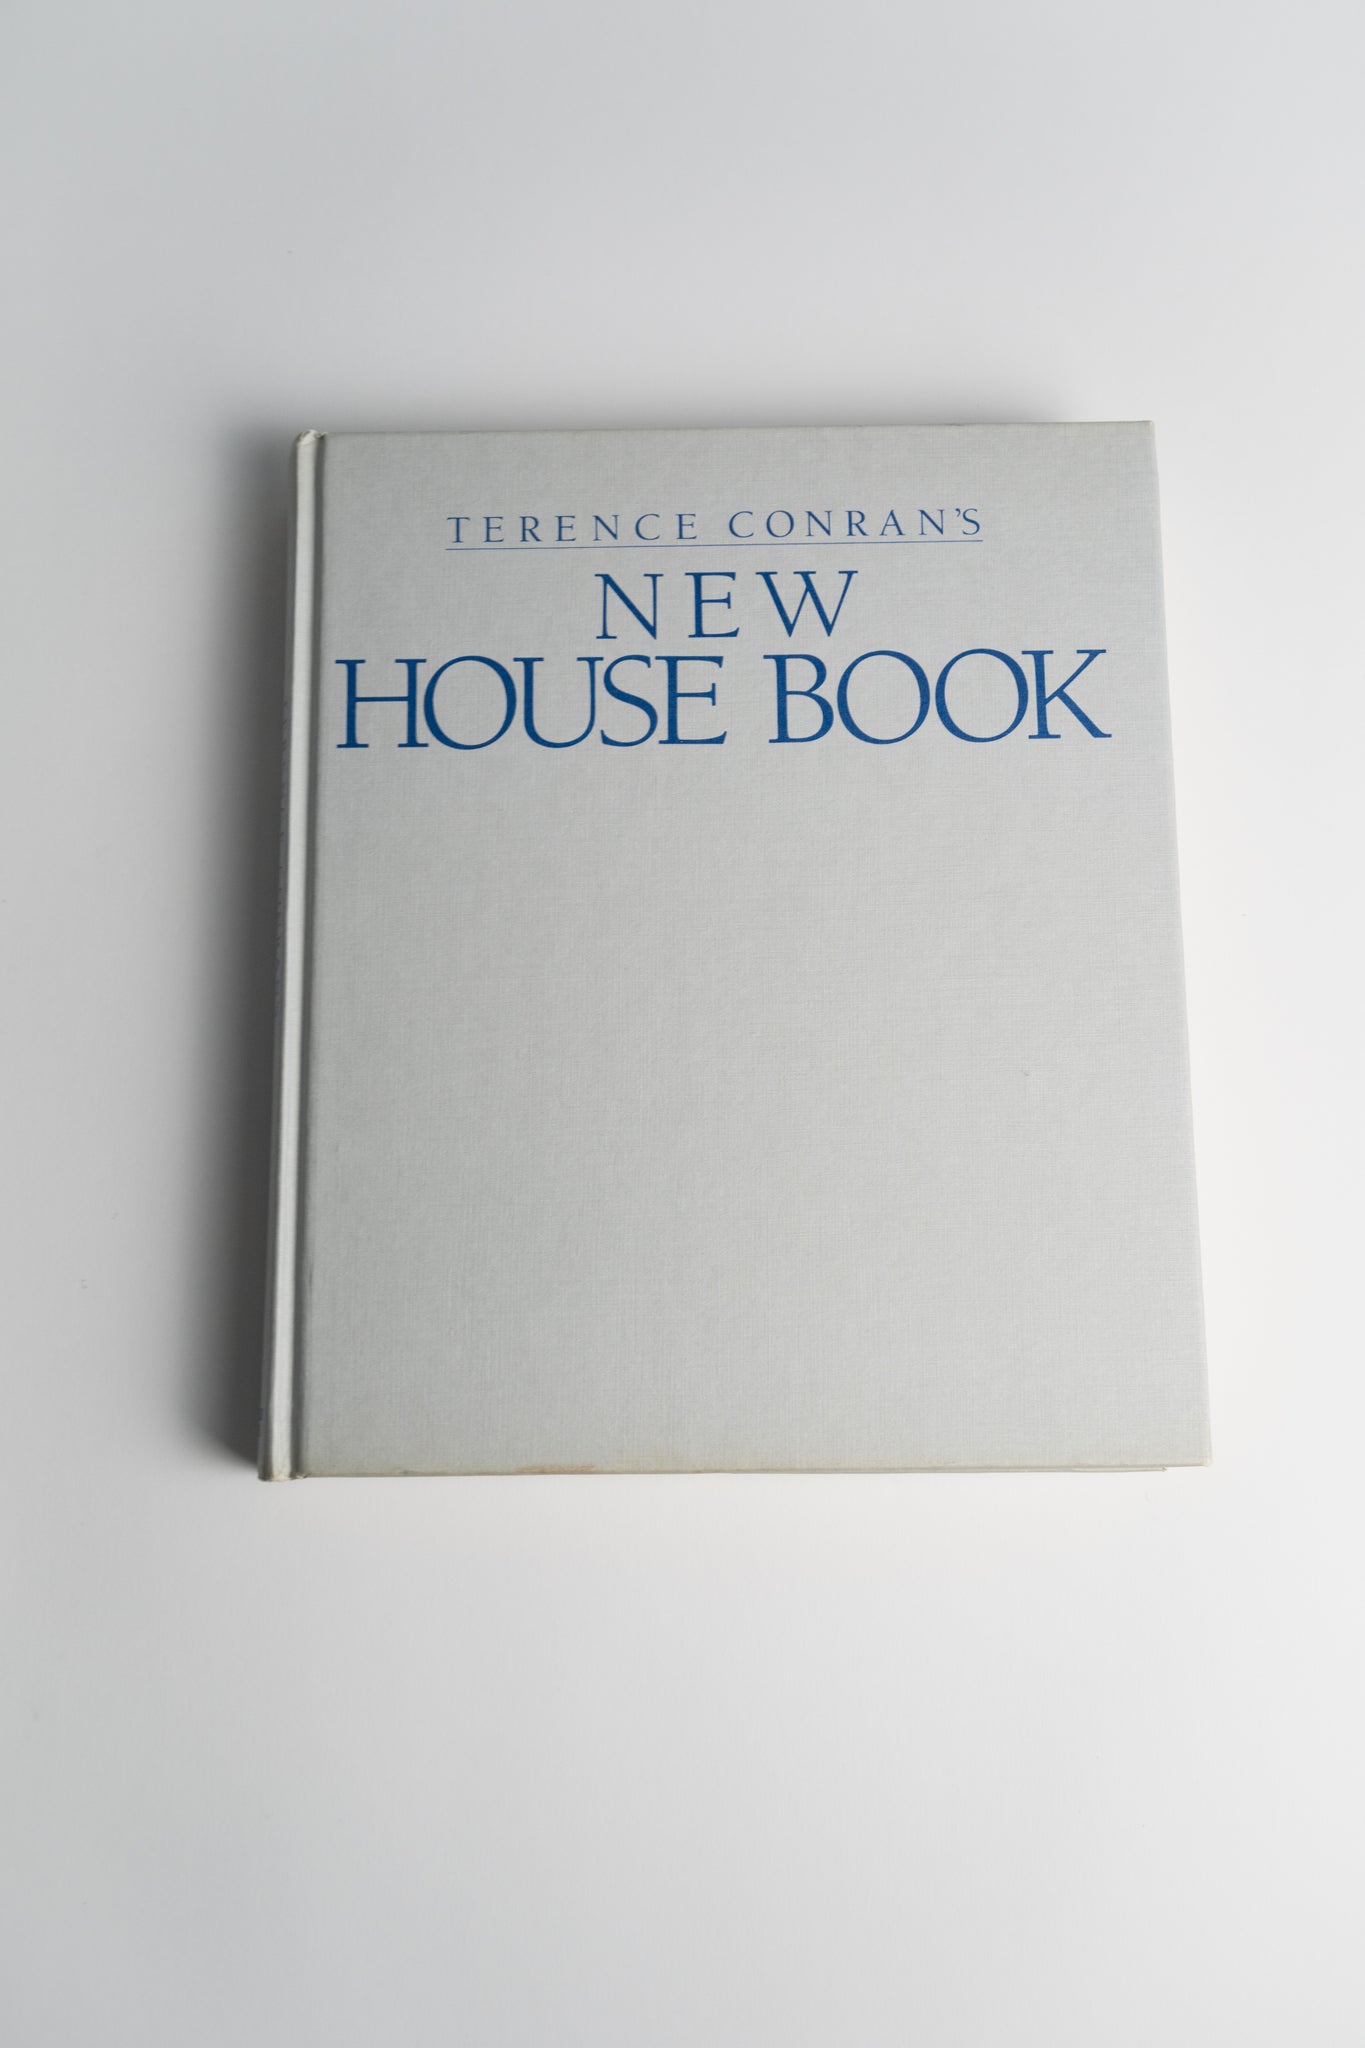 Terence Conran's New House Book (1985)